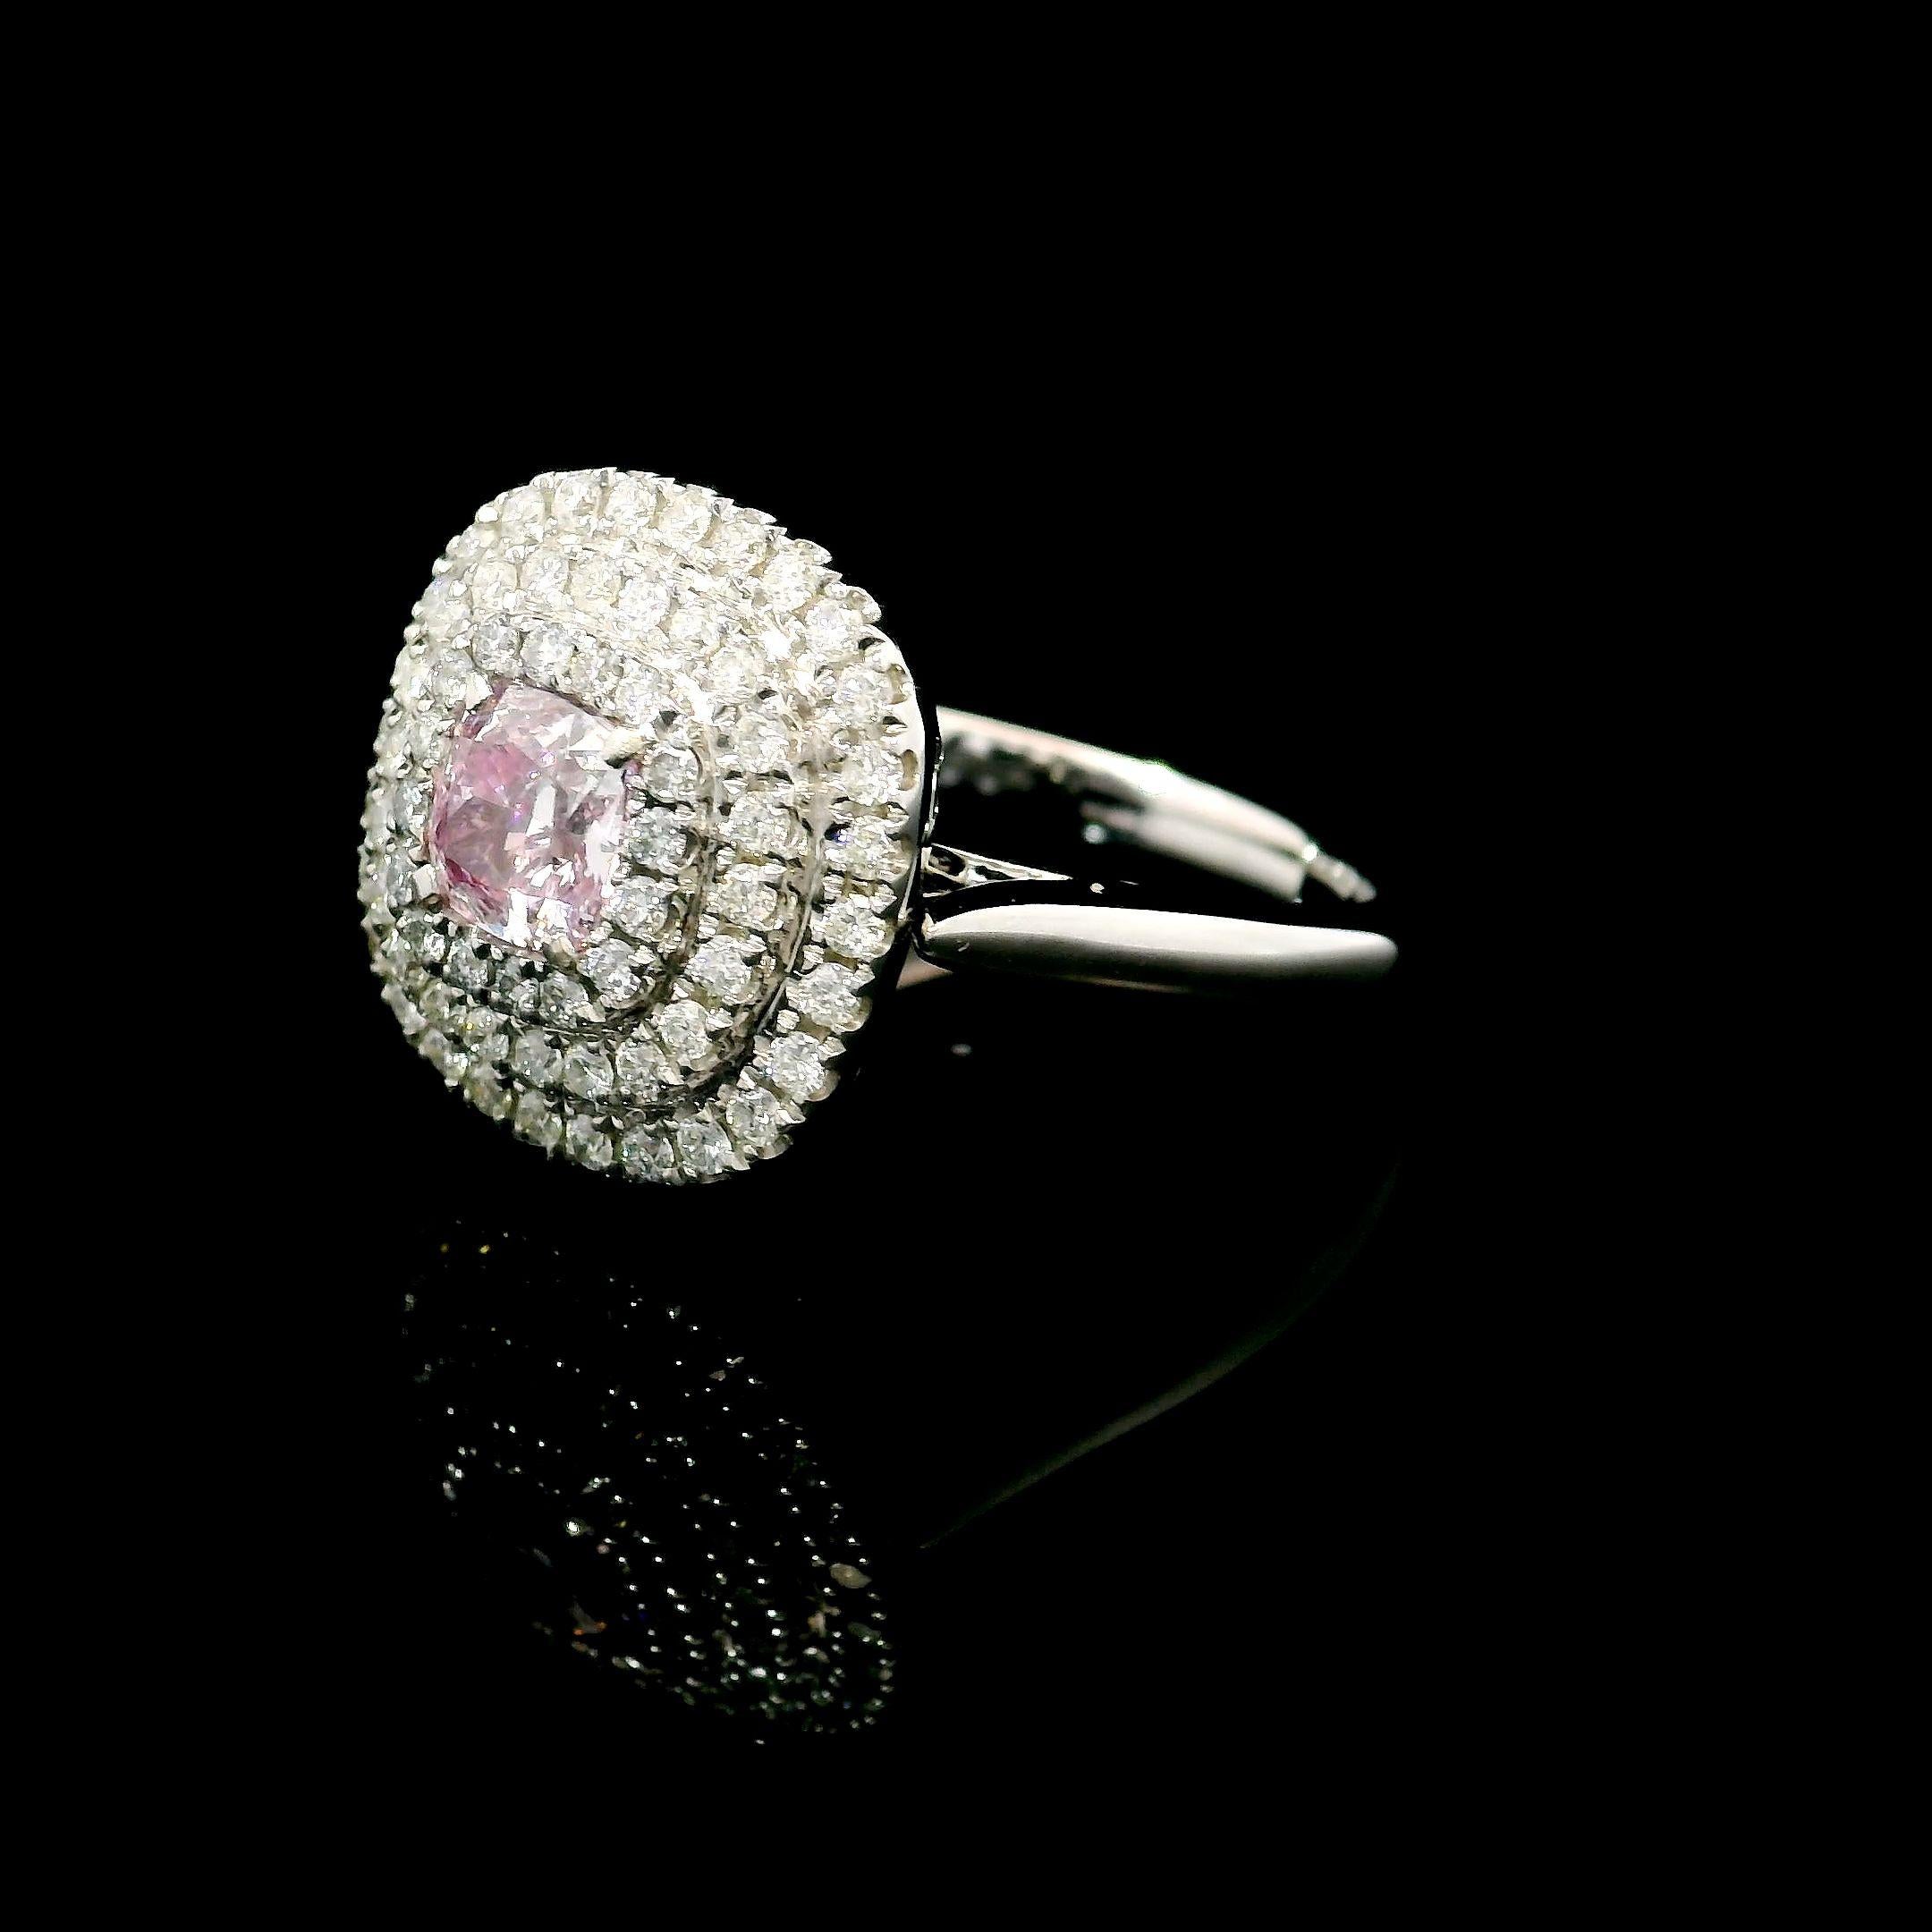 0.60 Carat Faint Pink Diamond Ring & Pendant Convertible GIA Certified For Sale 1